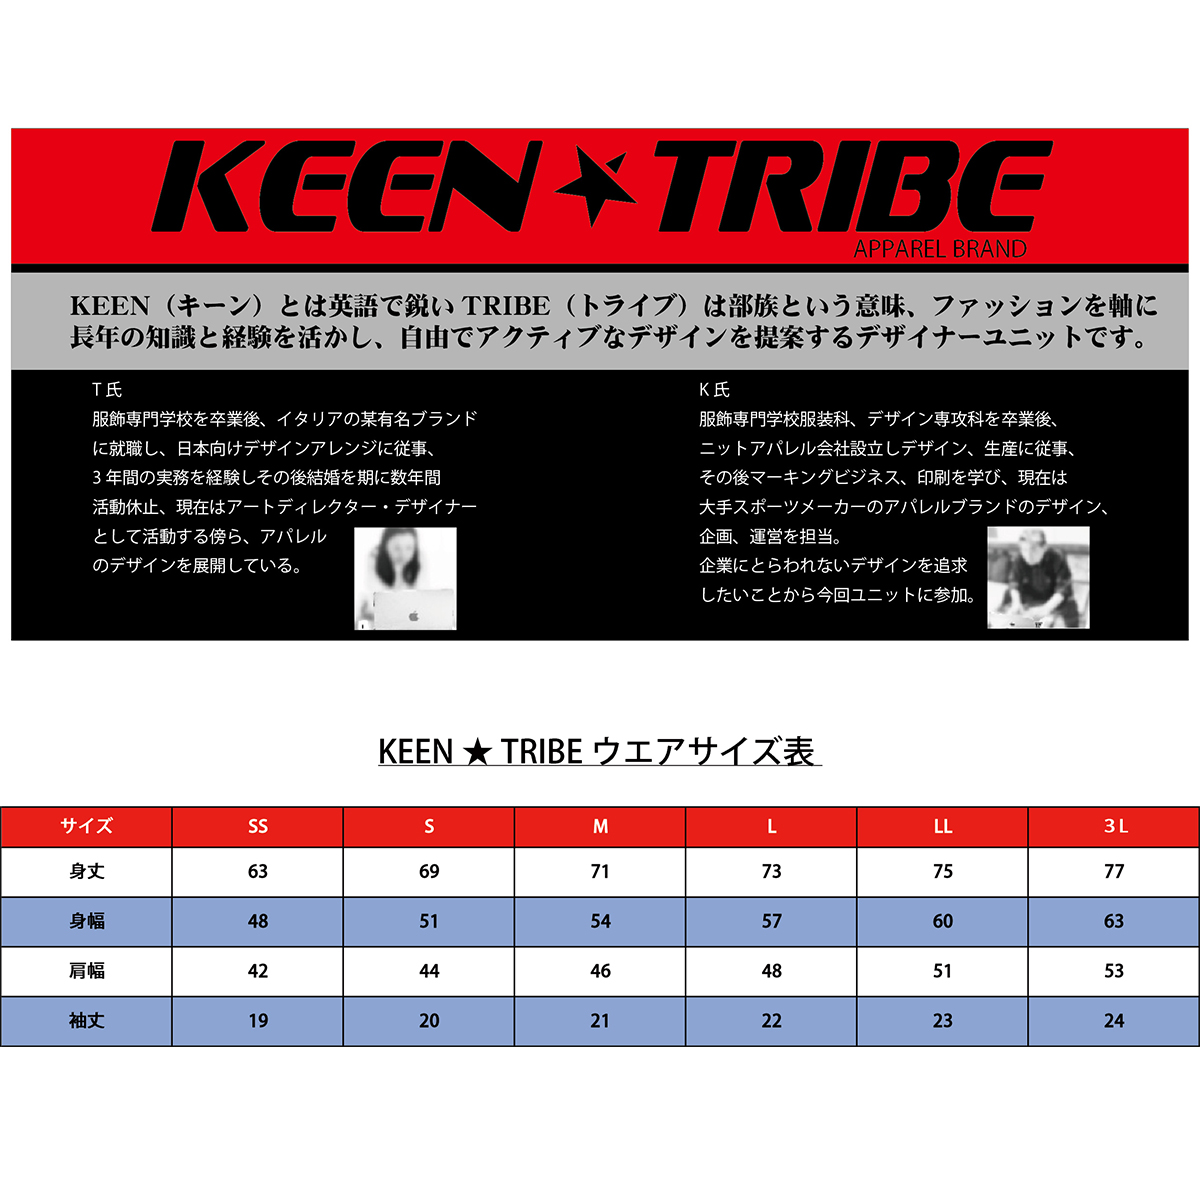 KEEN ★ TRIBE　KT-65(受注生産)